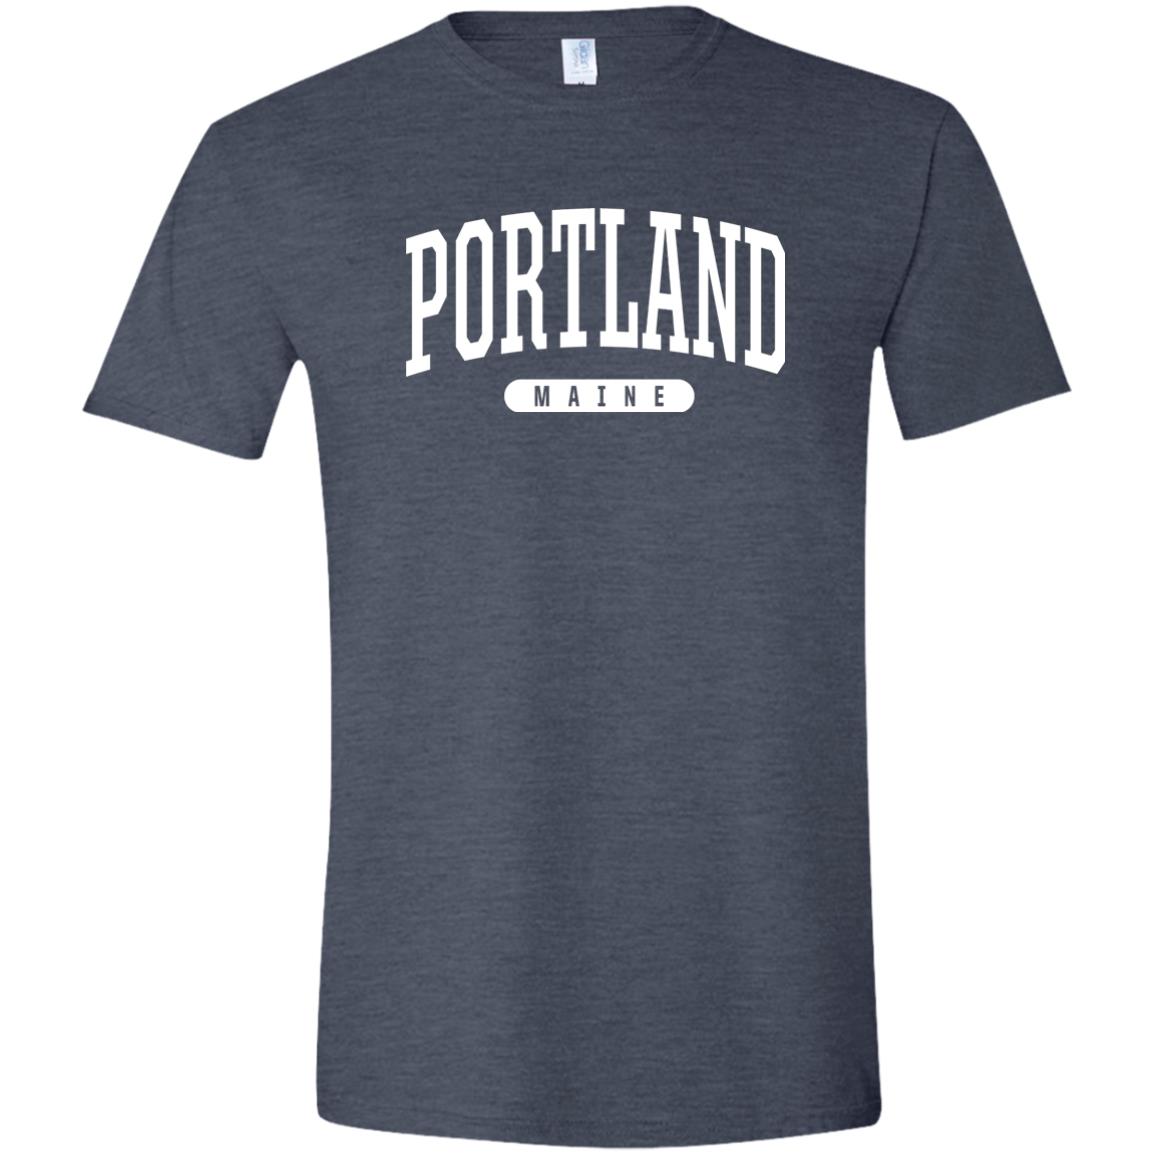 Portland Maine Shirt - College University Style Arch Letters - Comfy Soft T-Shirt (Unisex Tee) - 207 Threads